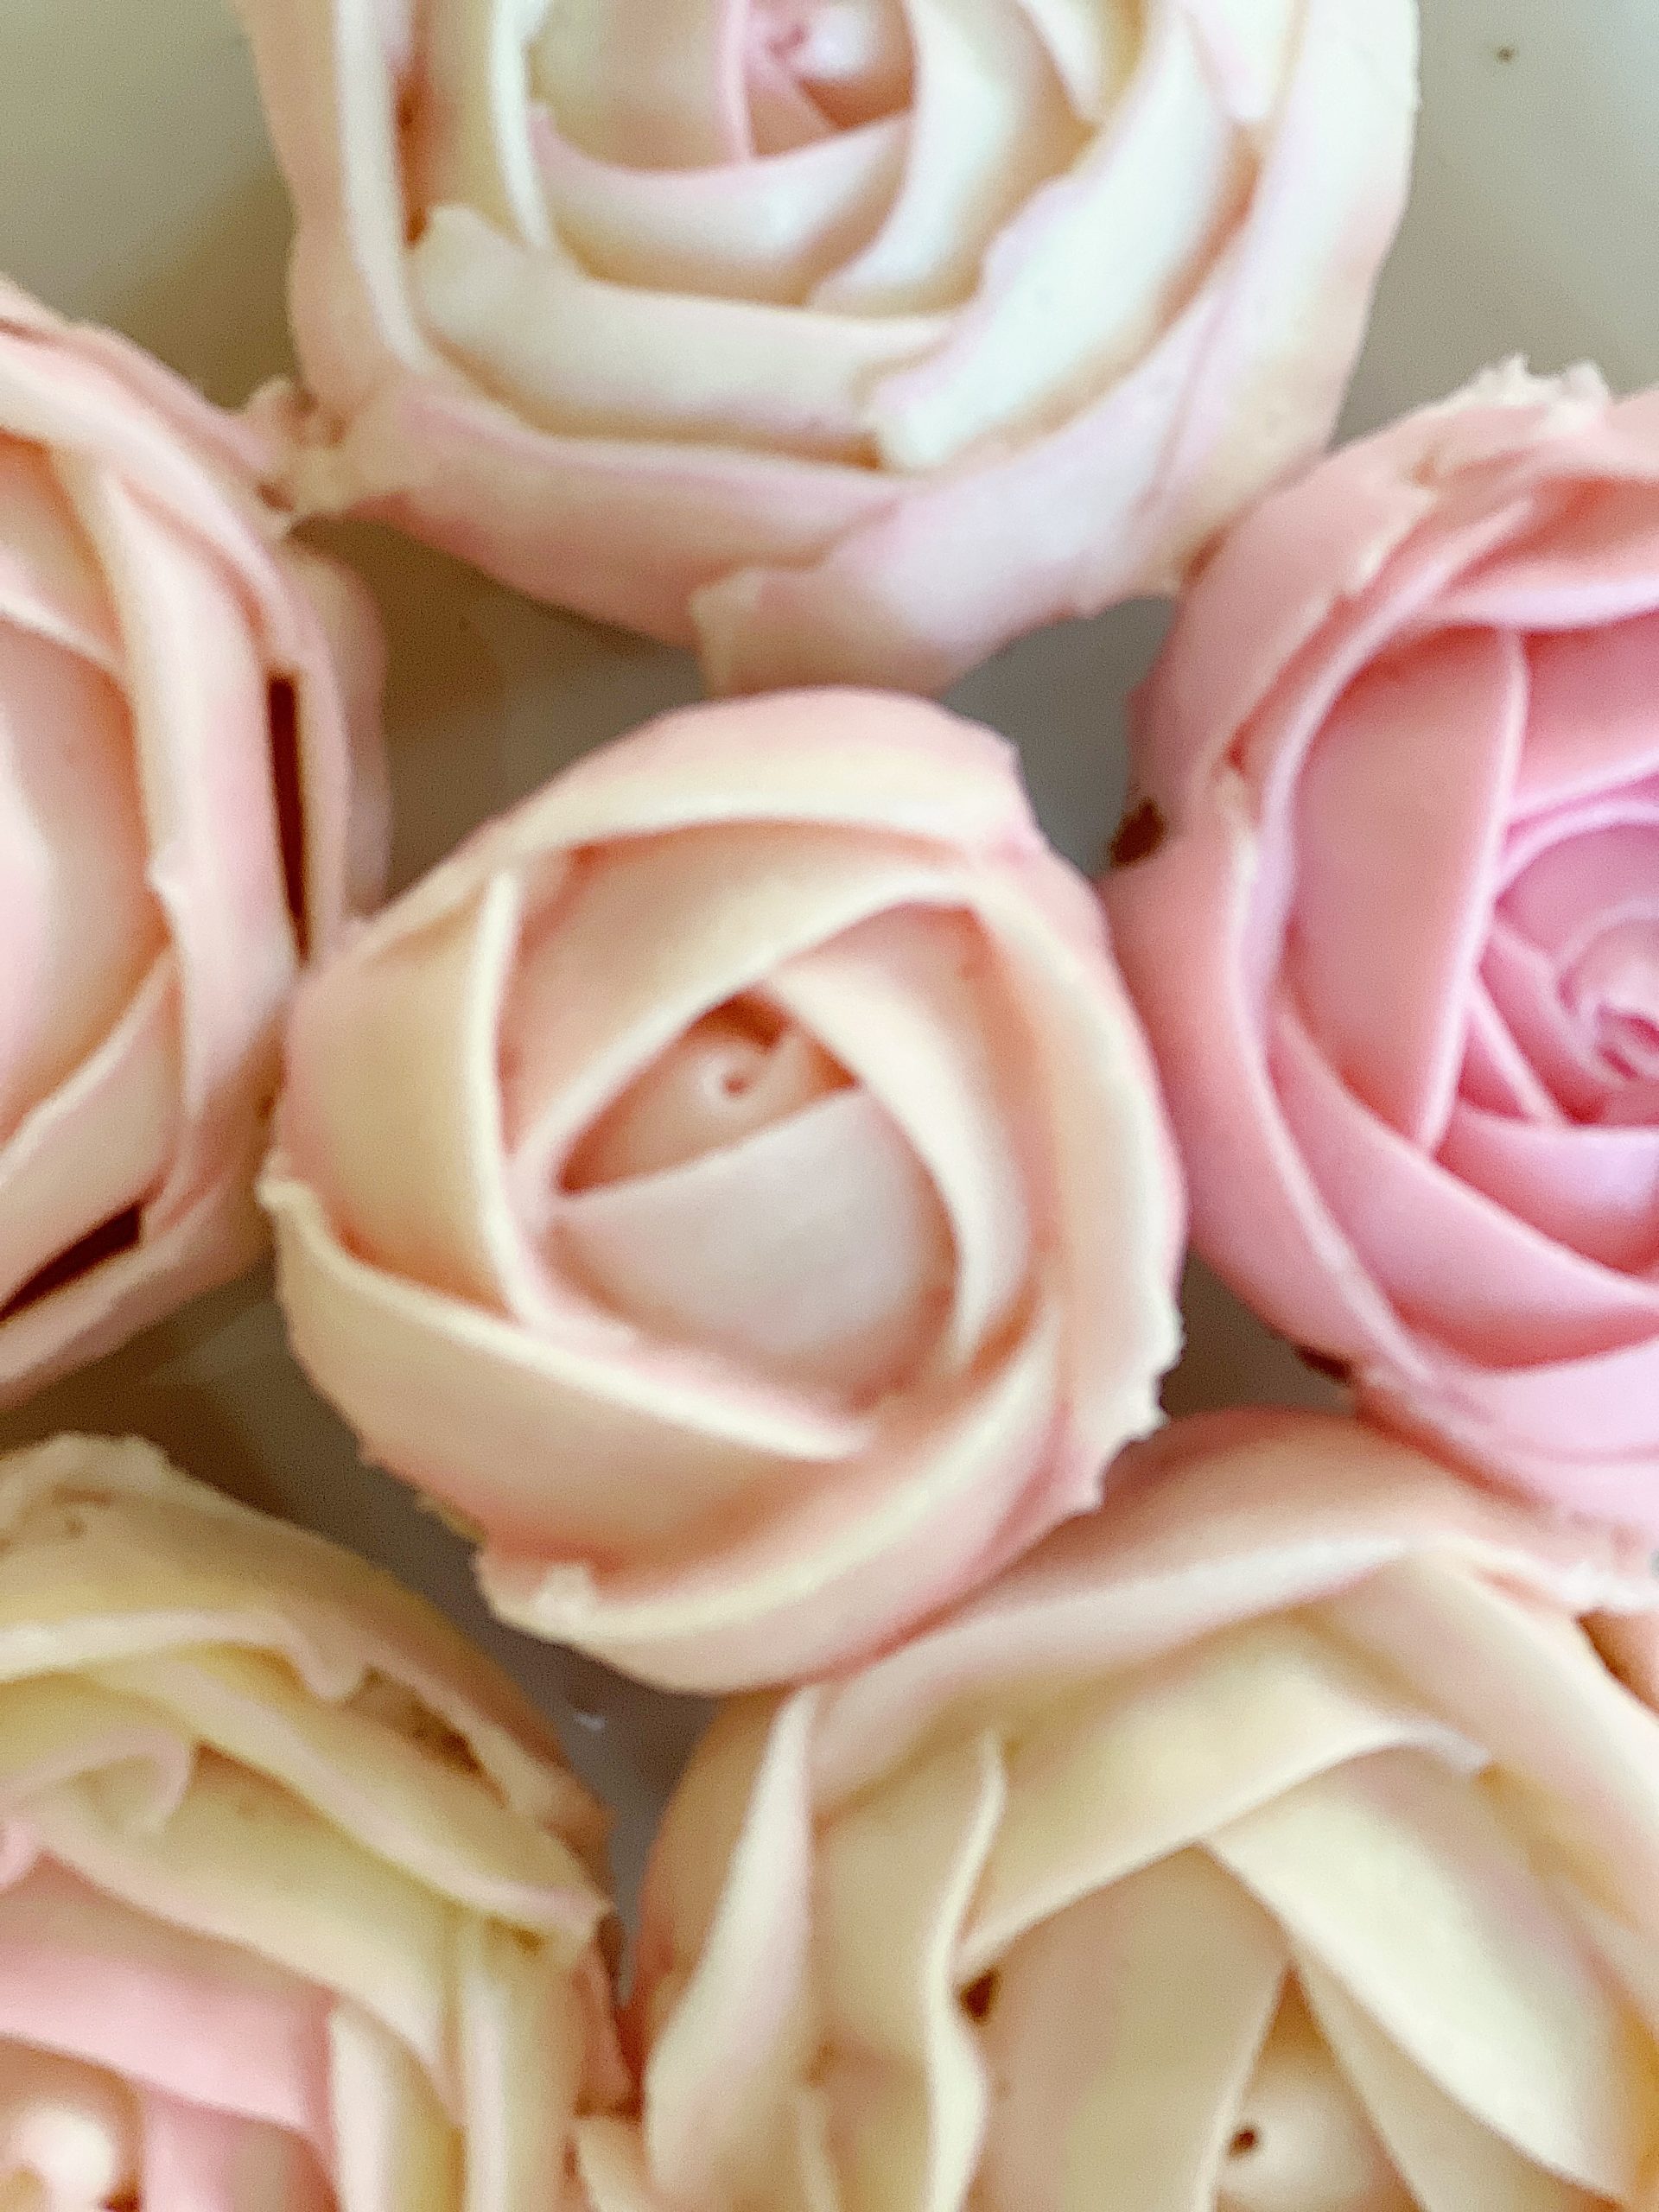 How to Make Flower Cupcakes 16